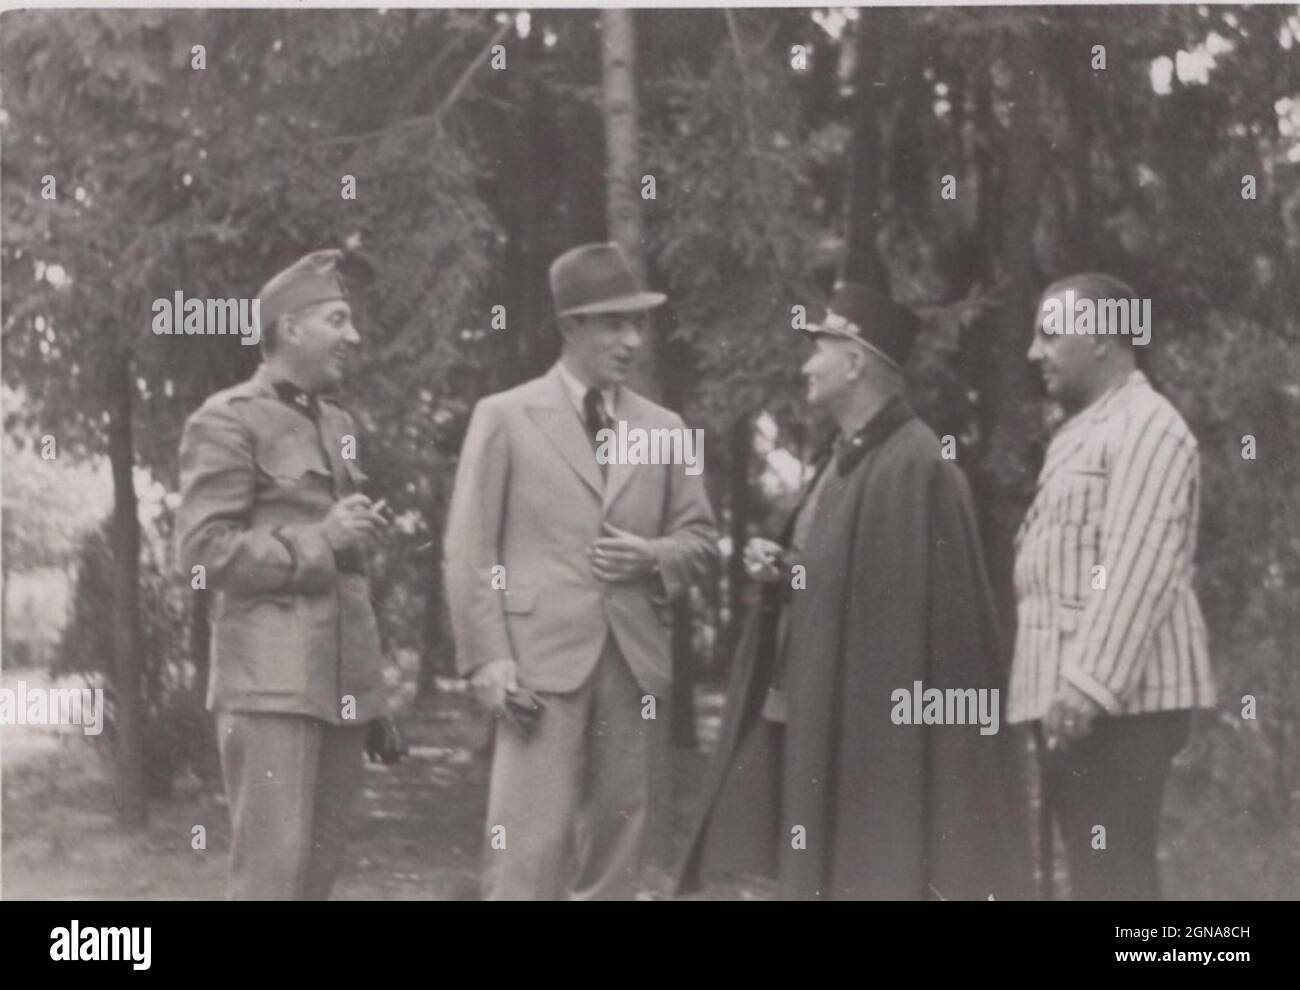 High ranking military officer meets with civilians in the forest. The well dressed person could be the owner of the wood or any nobleman, or  VIP ( very important person) or any politician.  They met in a silent place amoung 10 eyes. Place: forest. Country: Kingdom of Hungary. Period: 1920's, Source: original photograph / vintage man smoking a cigarette Stock Photo